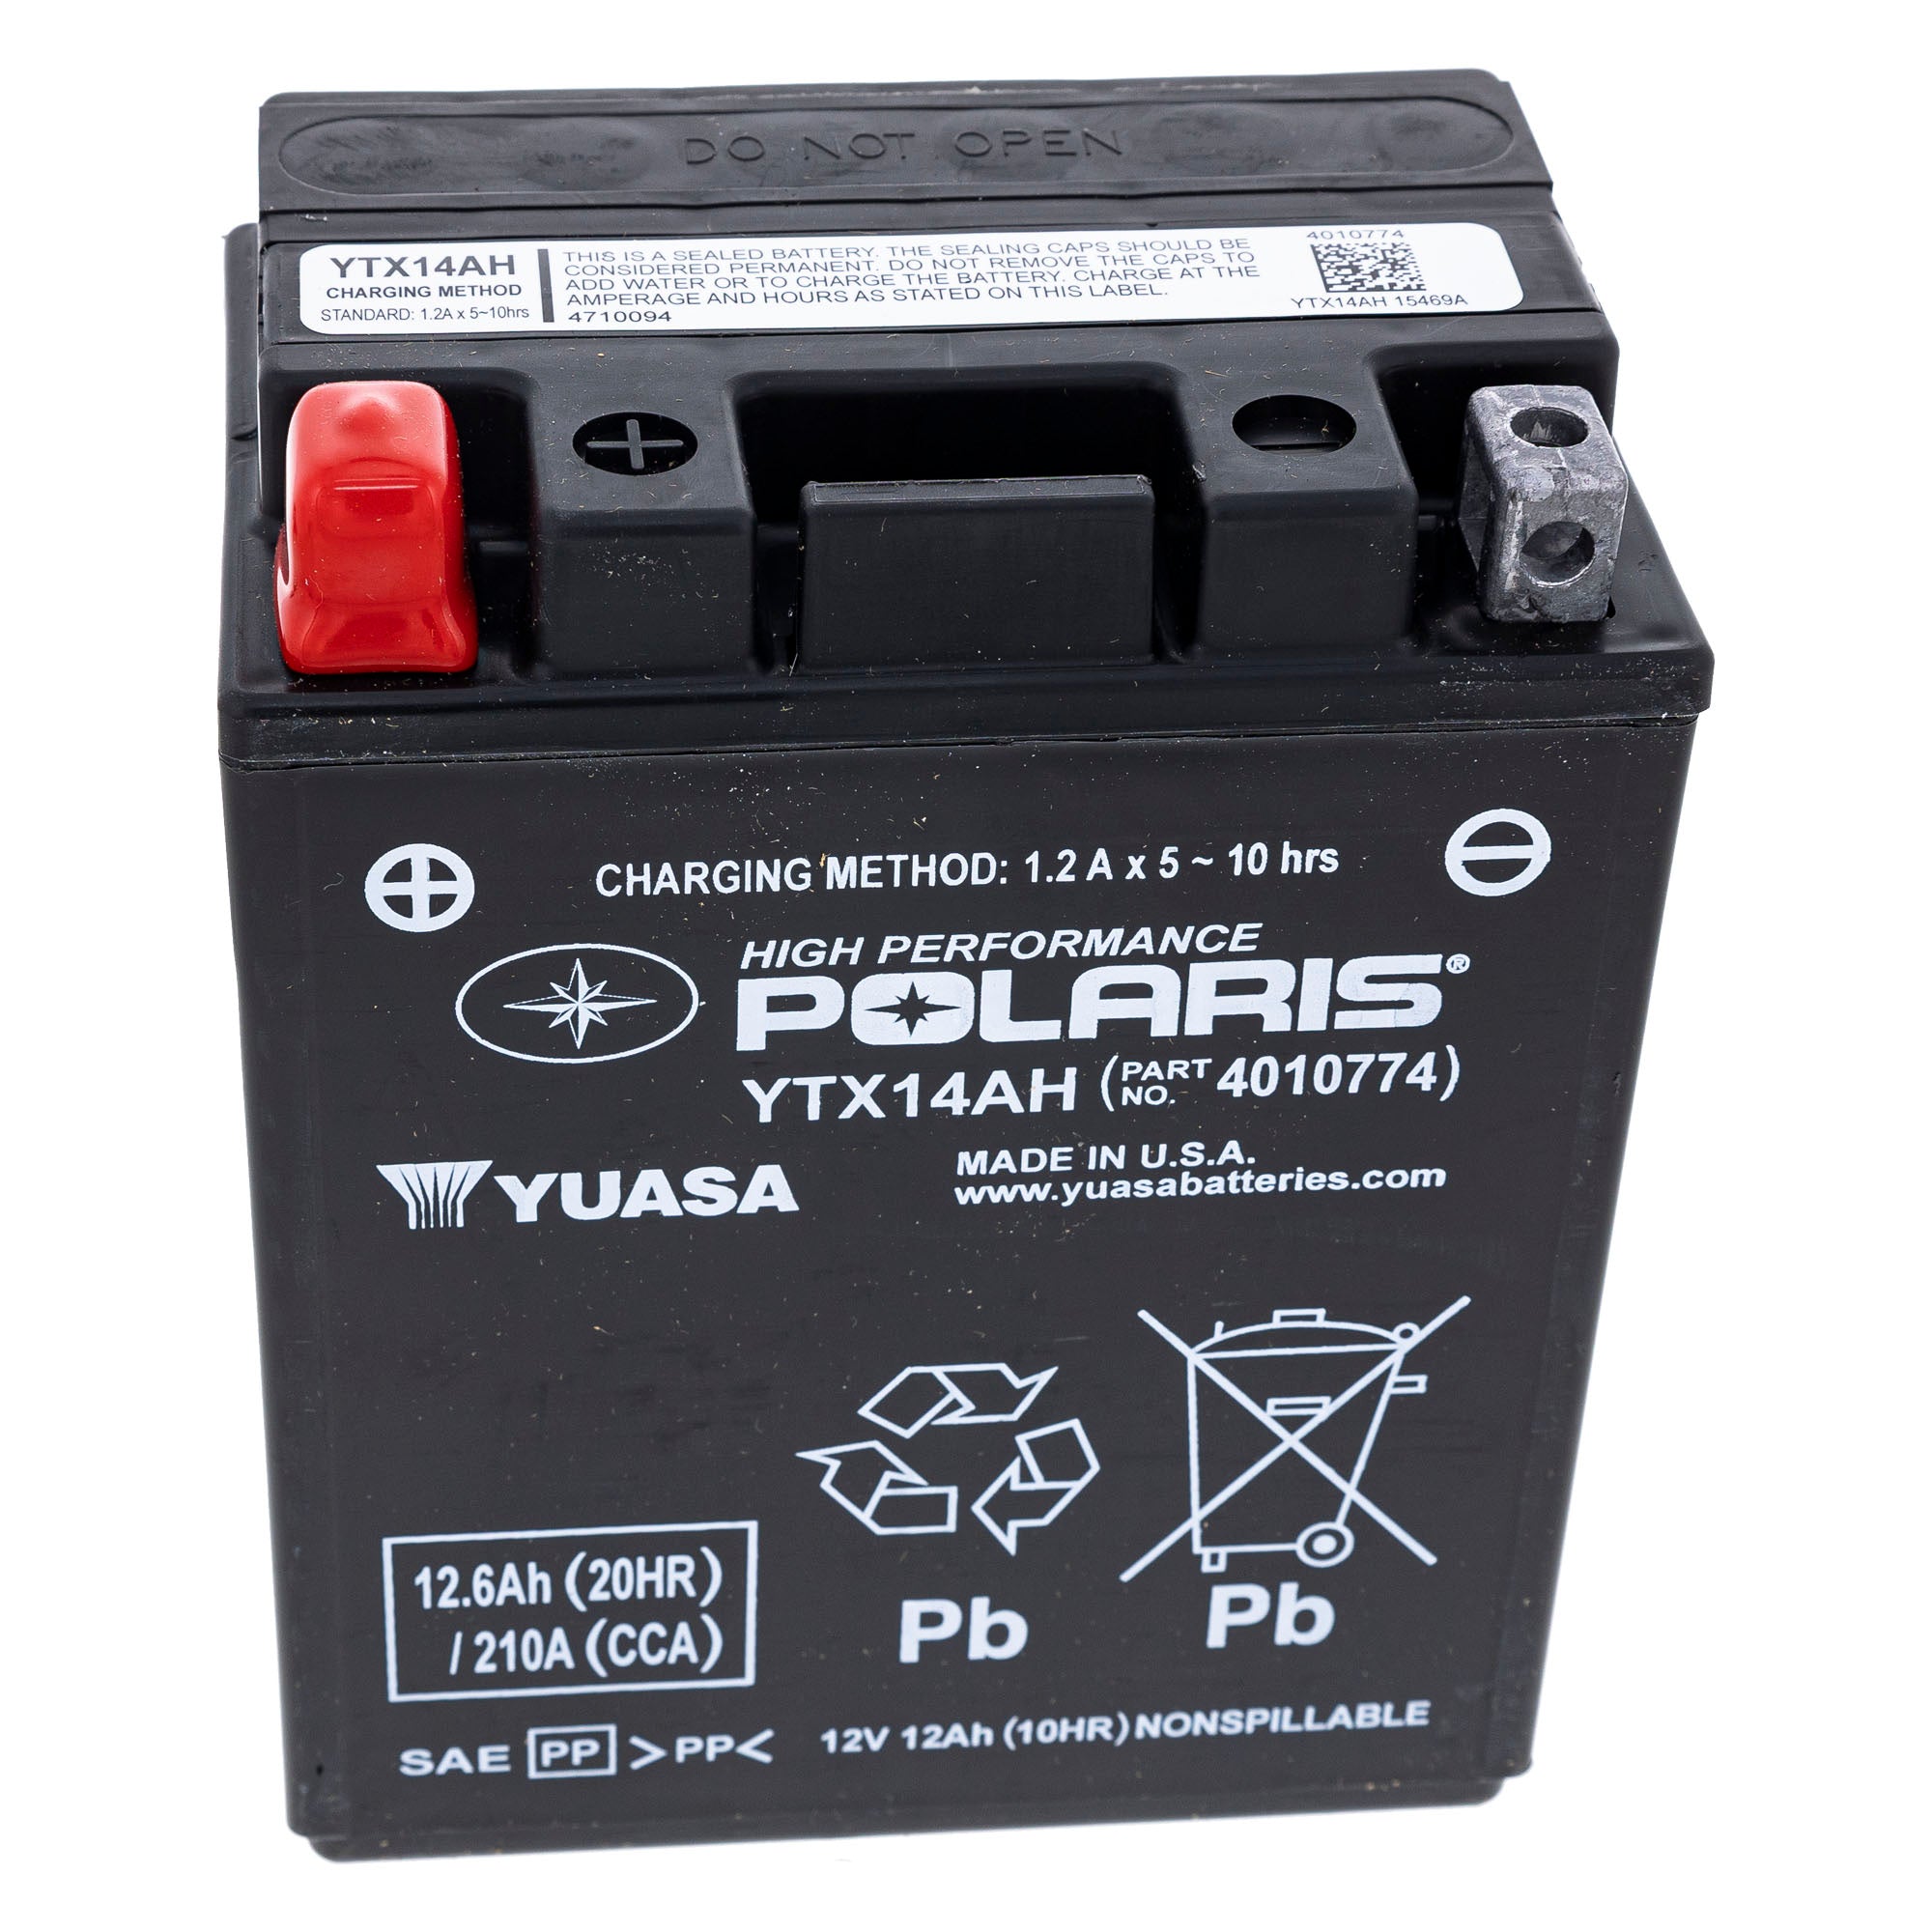 Polaris Sealed Charged 14AH Battery 4010774